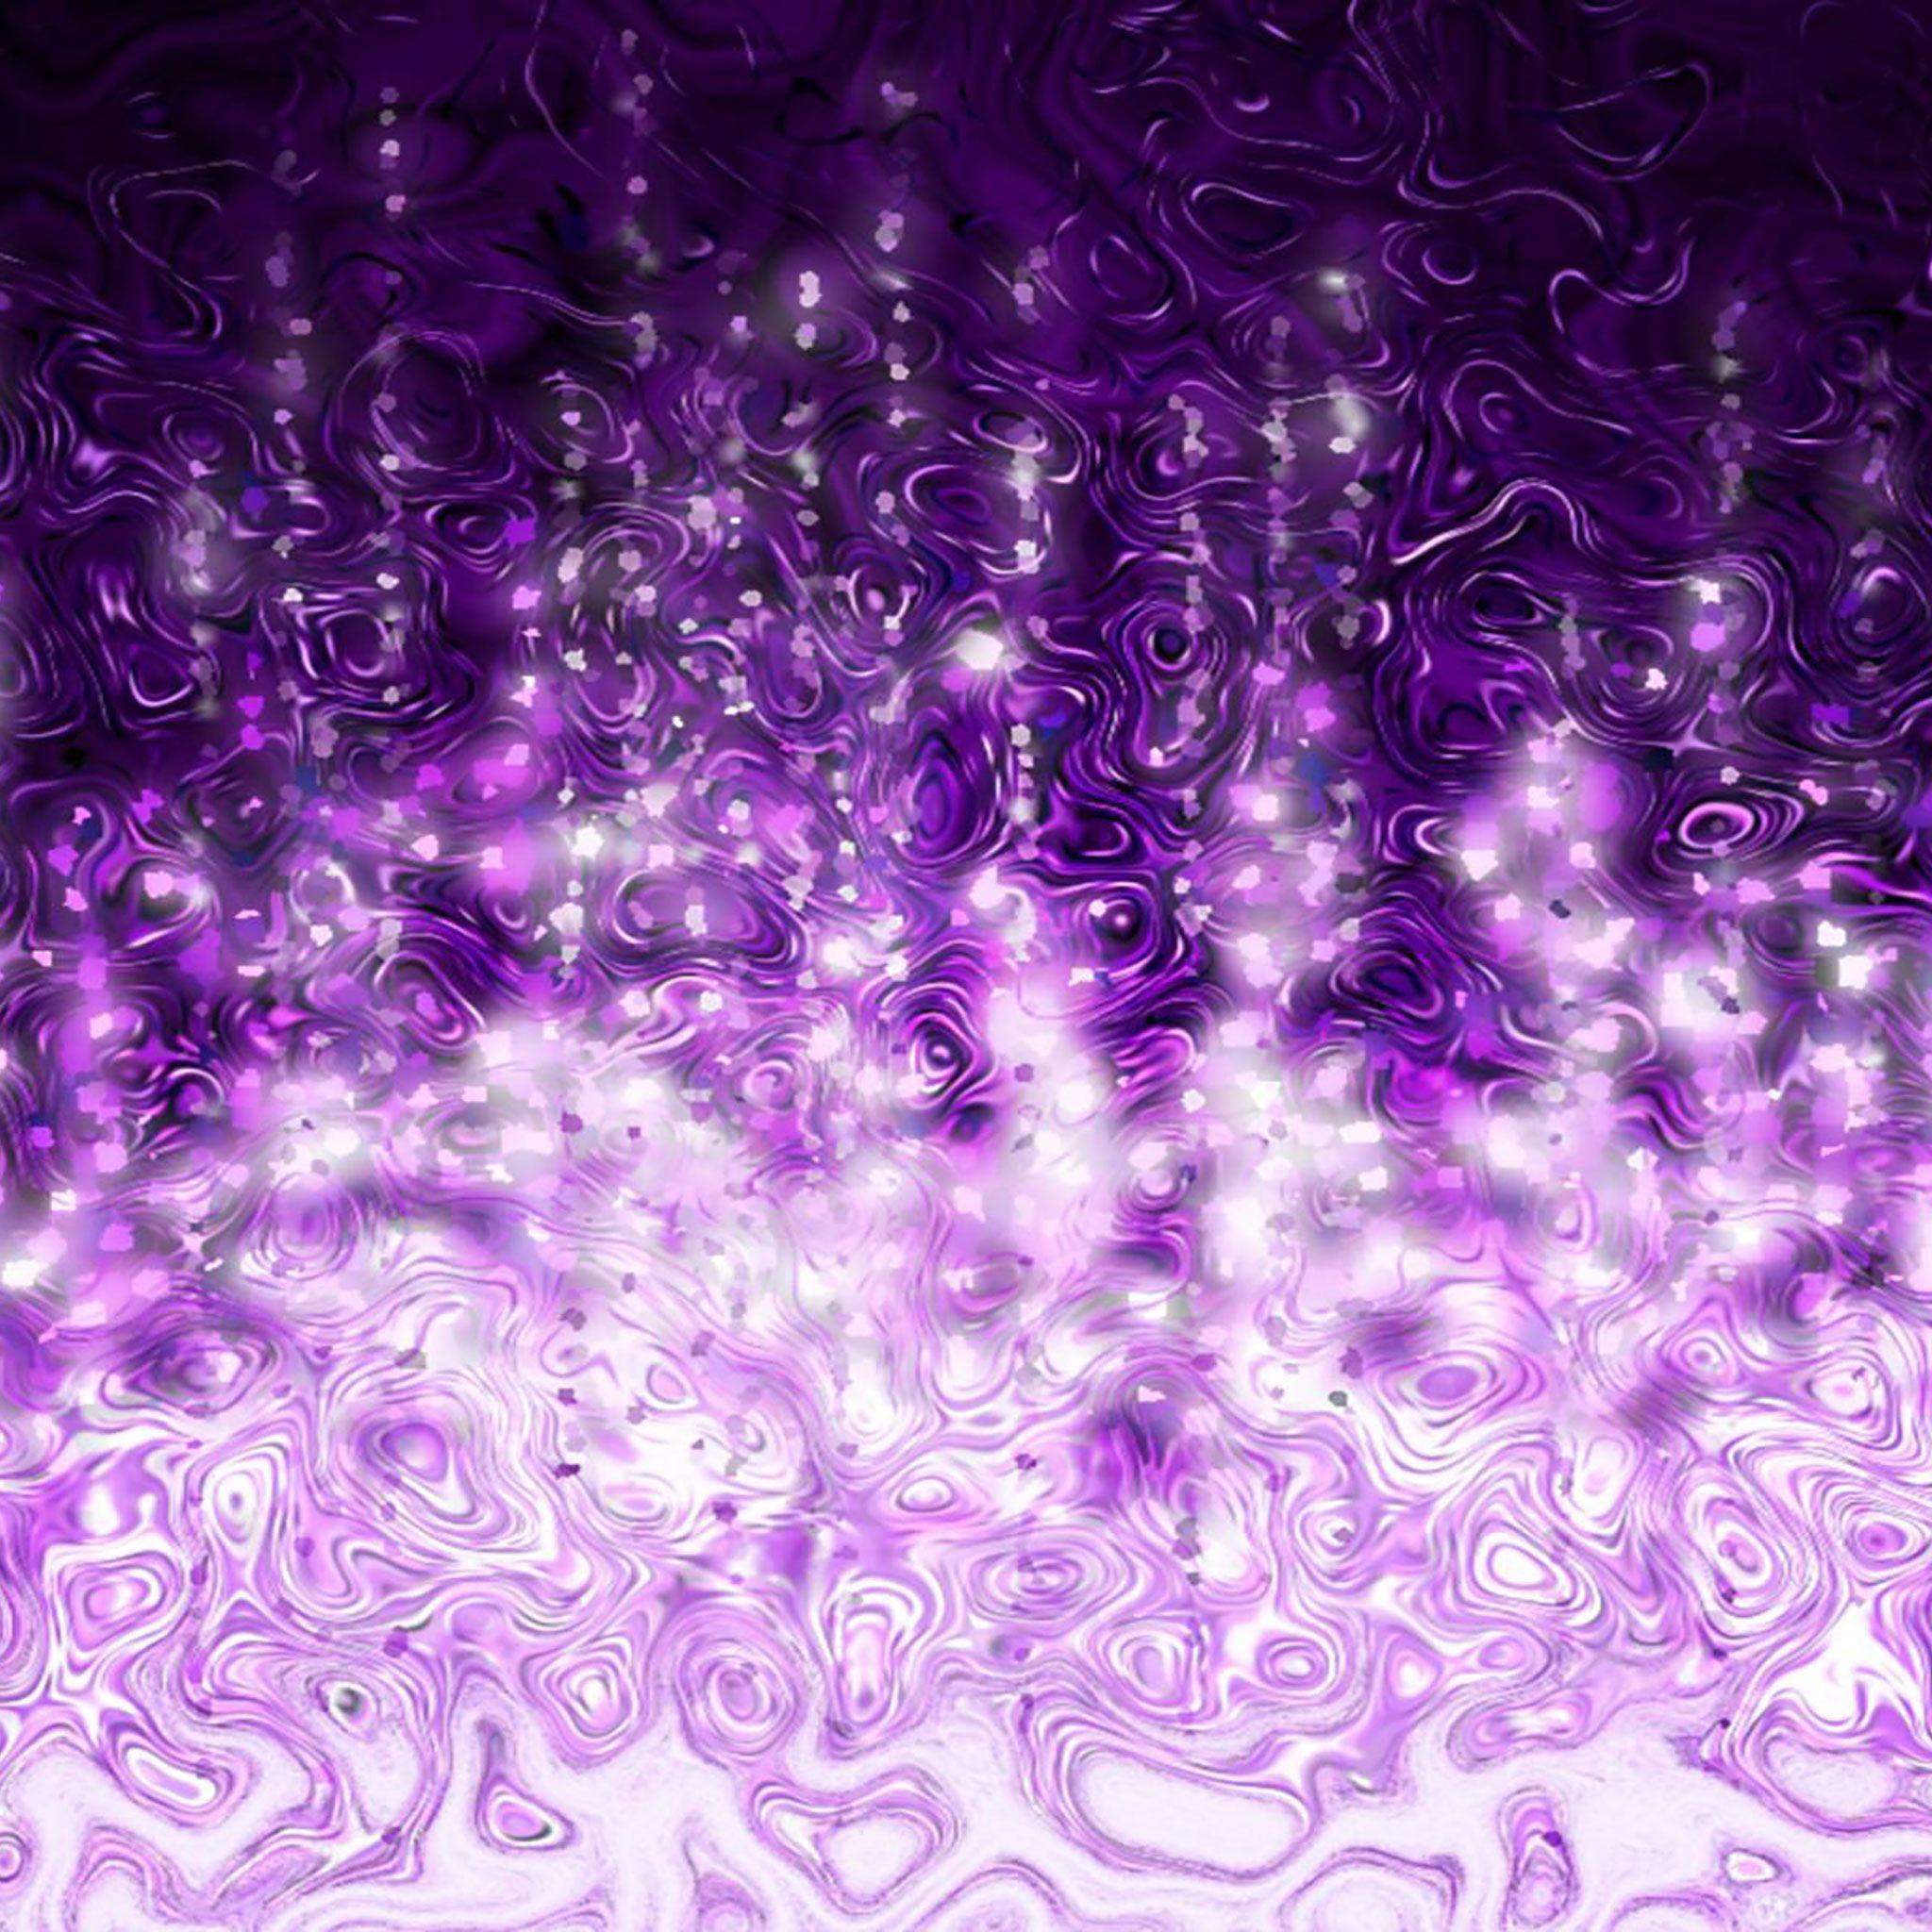 Download wallpaper 2780x2780 paint stains purple ipad air ipad air 2  ipad 3 ipad 4 ipad mini 2 ipad mini 3 ipad mini 4 ipad pro 97 for  parallax hd background